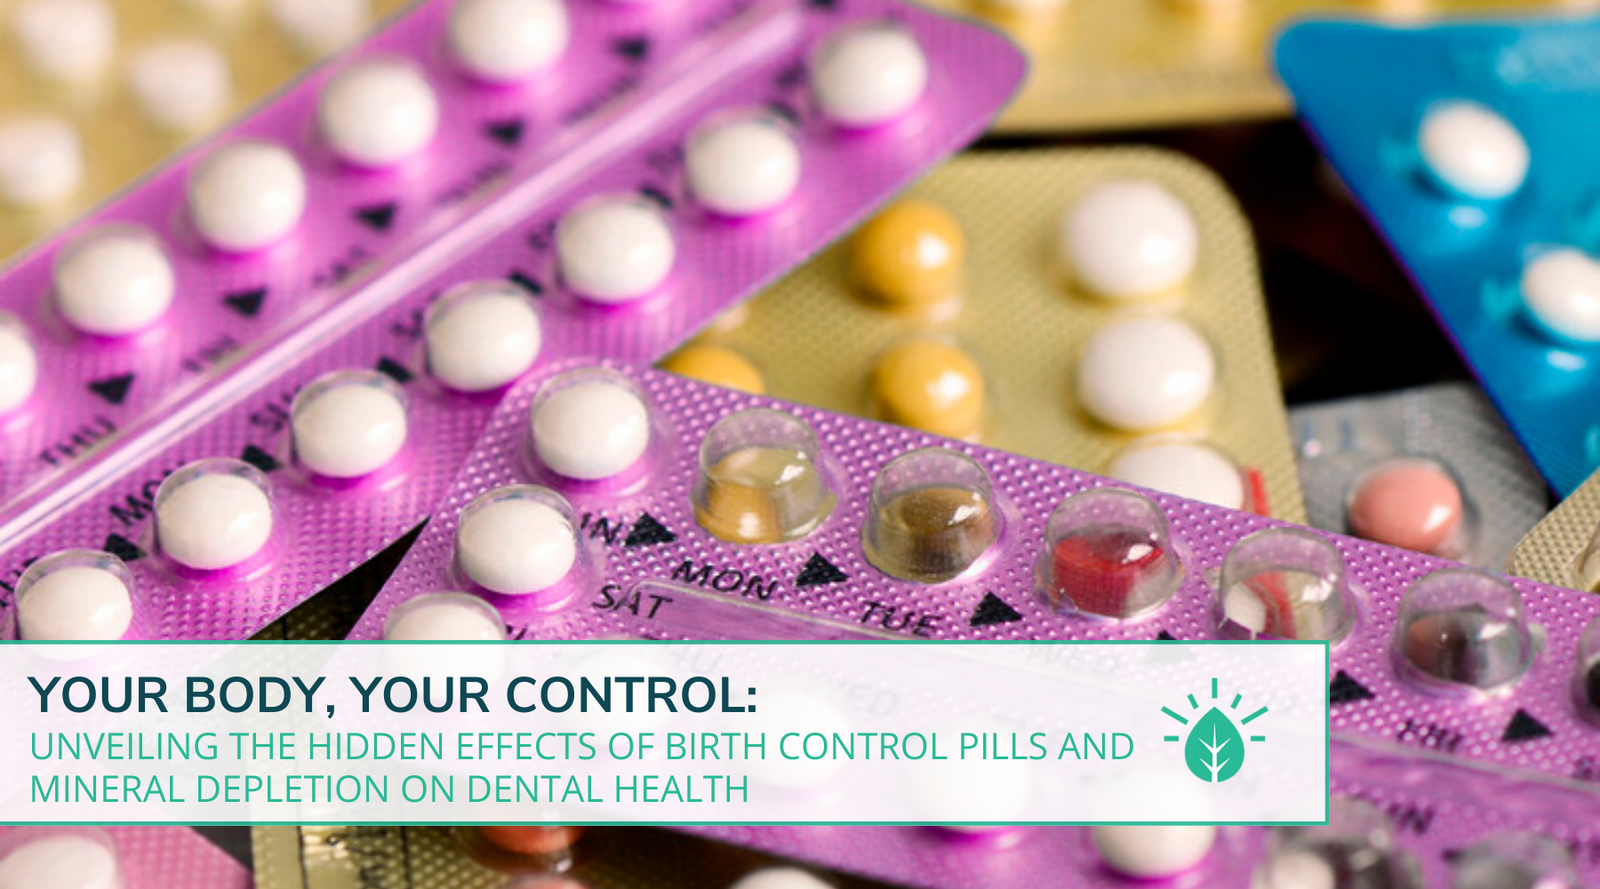 Your Body, Your Control: Unveiling the Hidden Effects of Birth Control Pills and Mineral Depletion on Dental Health